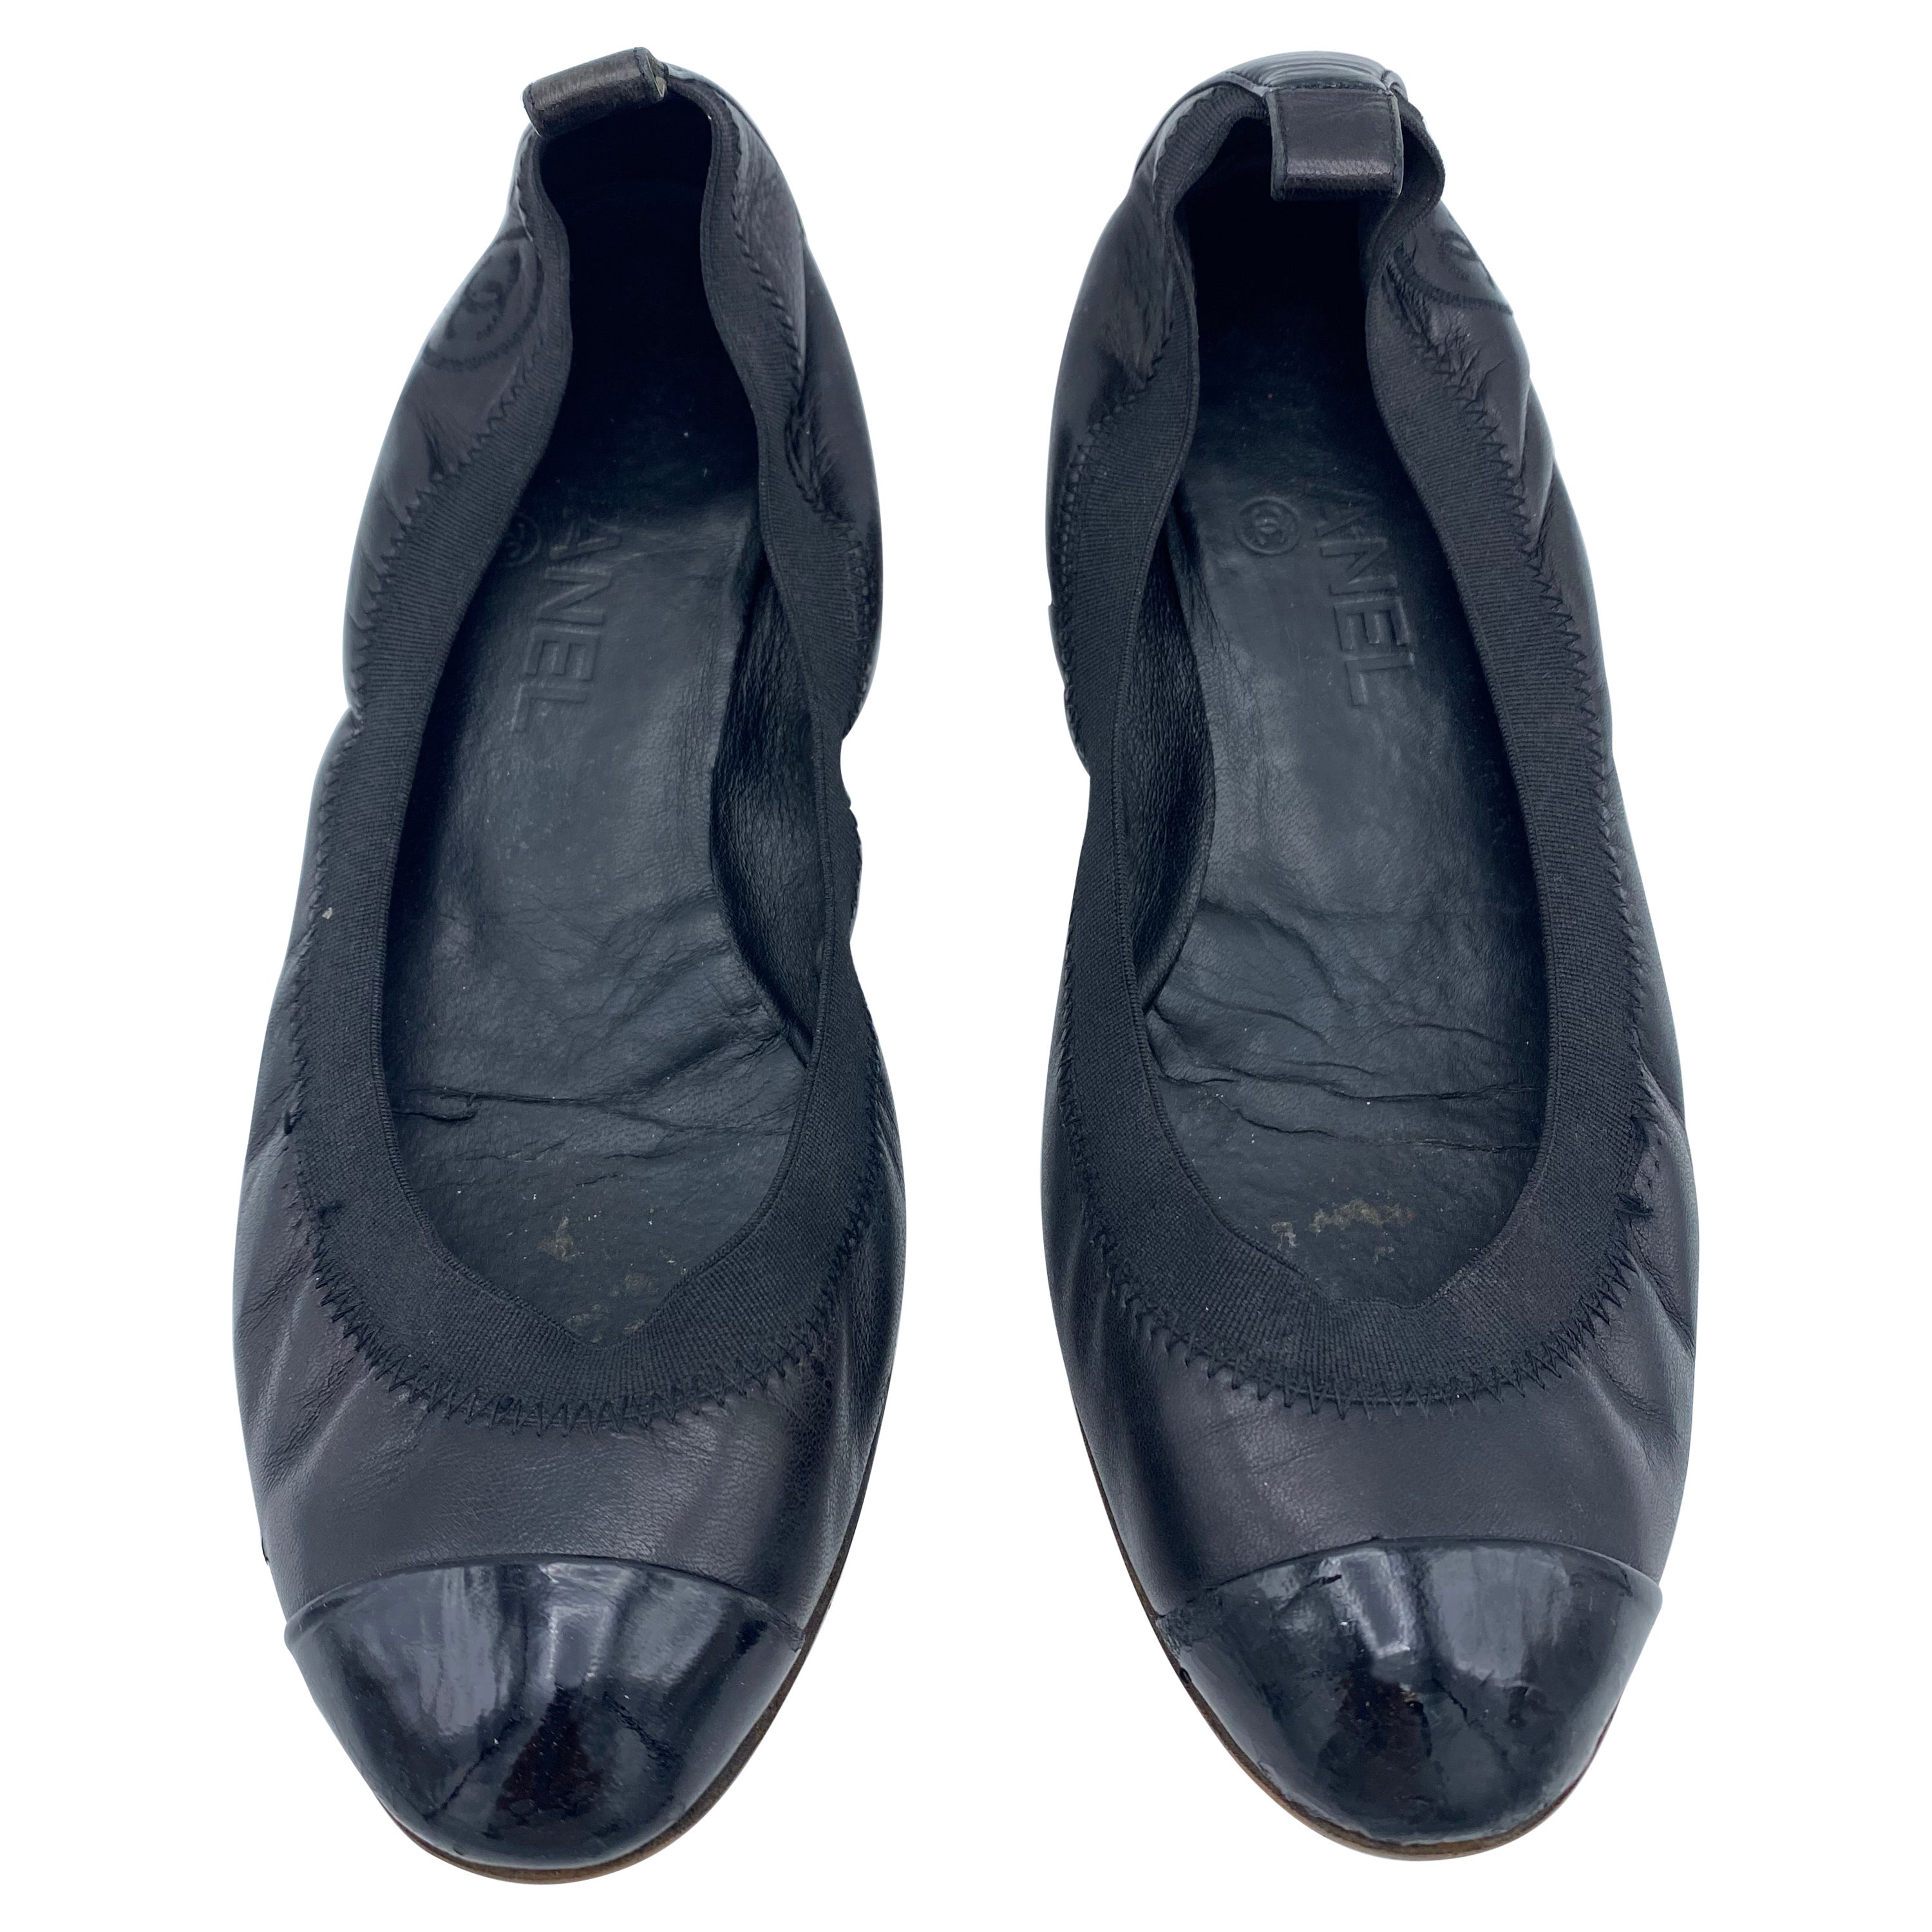 Chanel Black Leather Ballet Flat Shoes, Size 38 For Sale